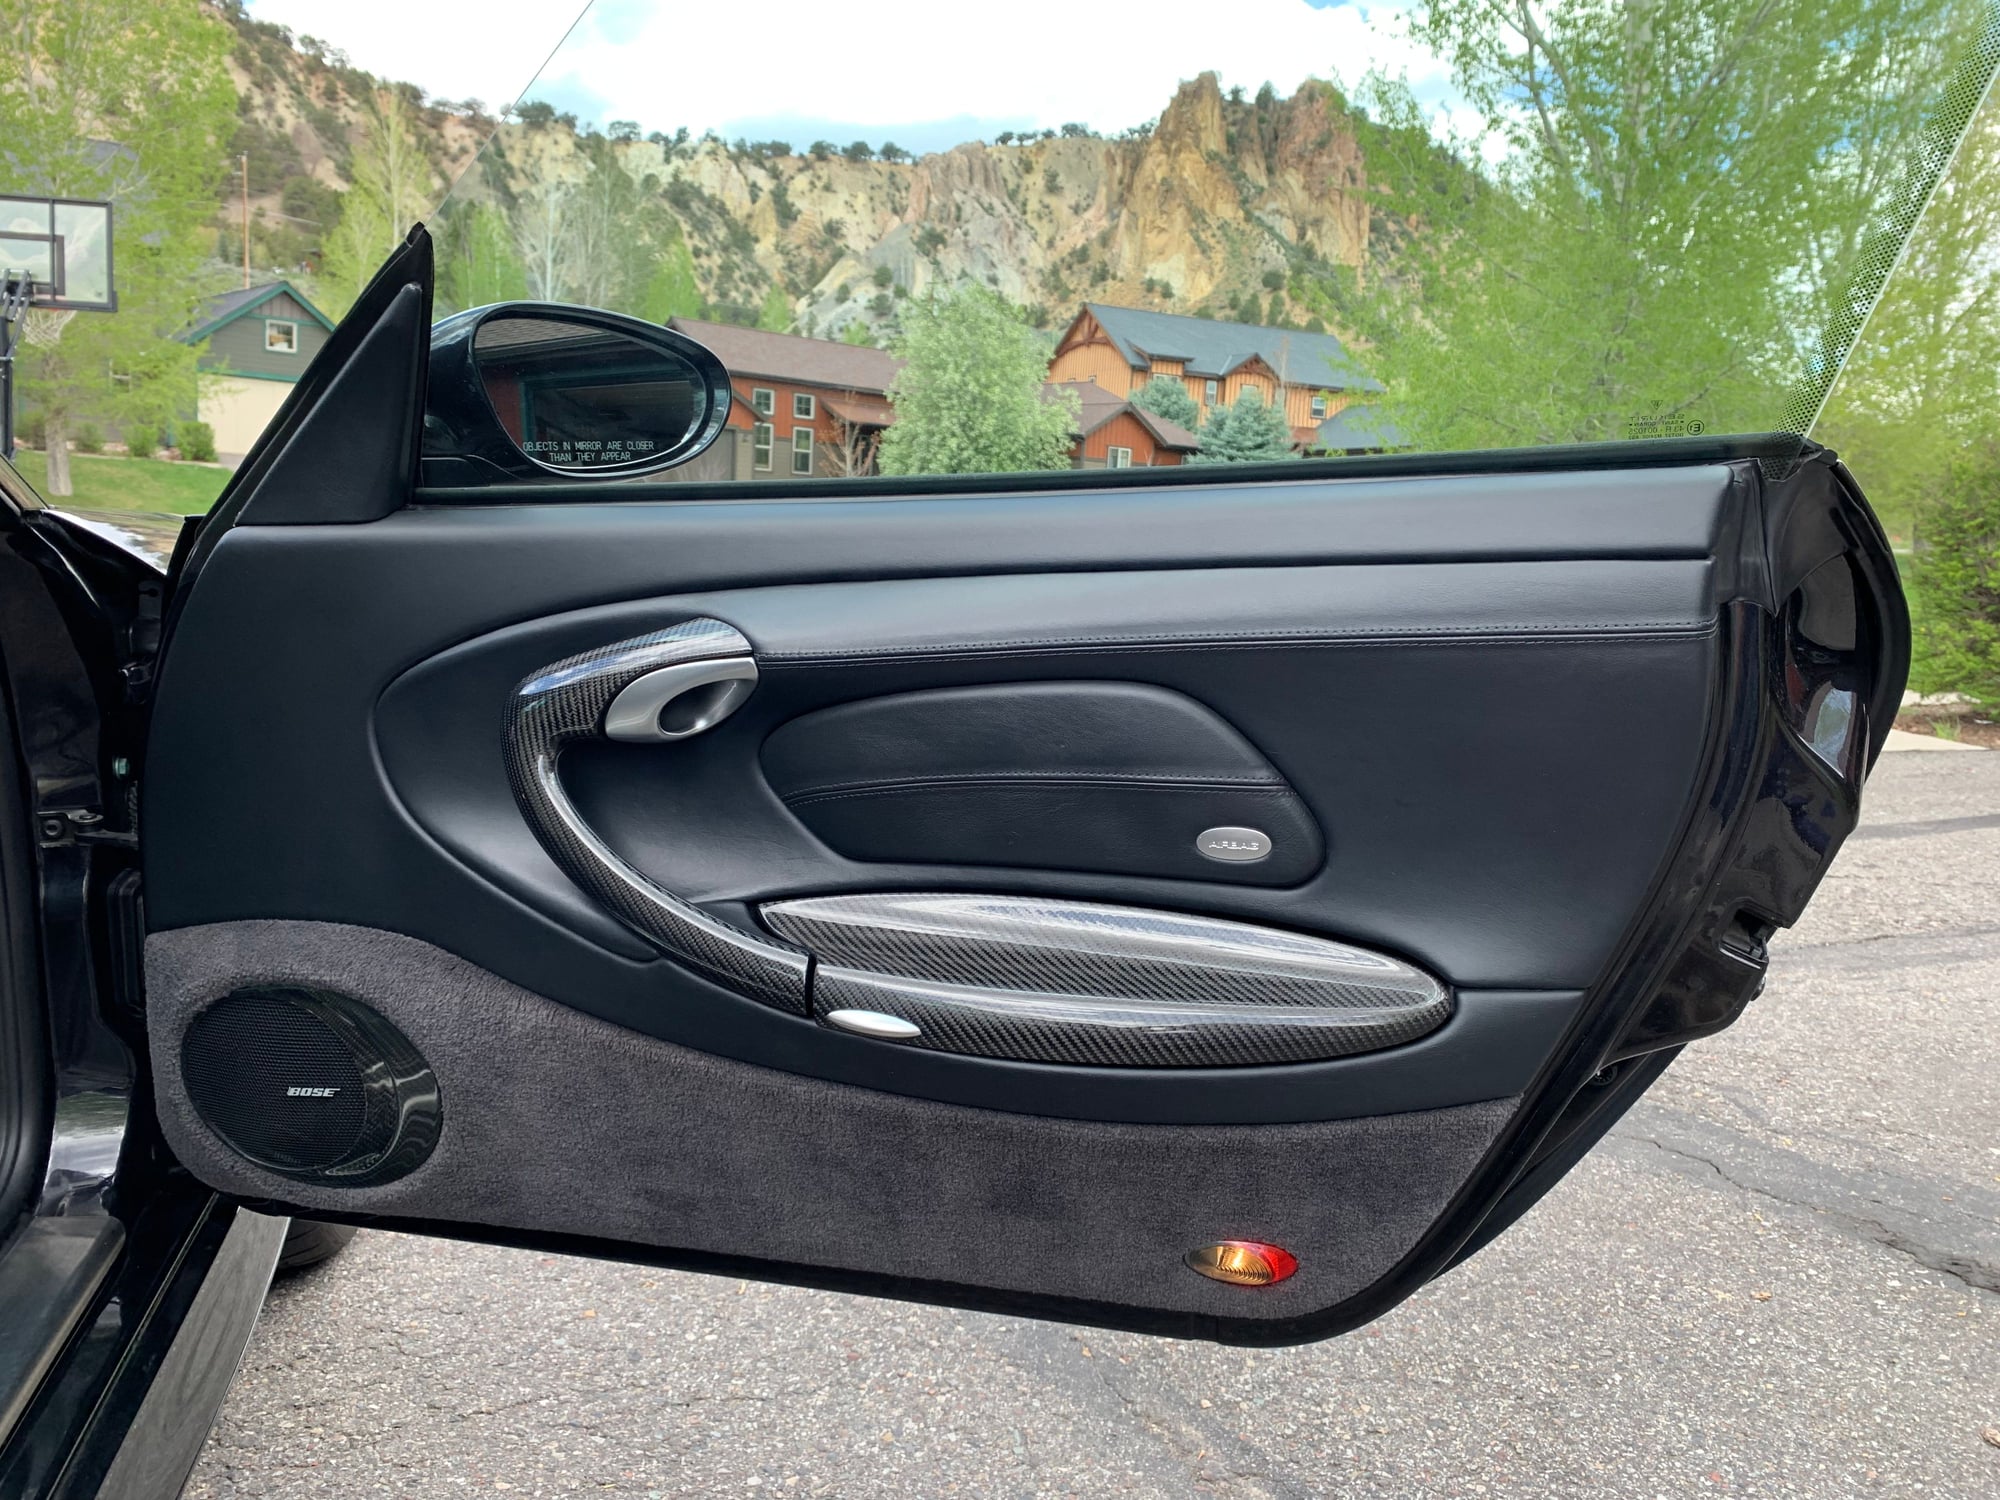 2002 Porsche 911 - 2002 911 Turbo For Sale - Used - VIN WP0AB29952S685468 - 63,400 Miles - 6 cyl - AWD - Manual - Coupe - Black - Glenwood Springs, CO 81601, United States